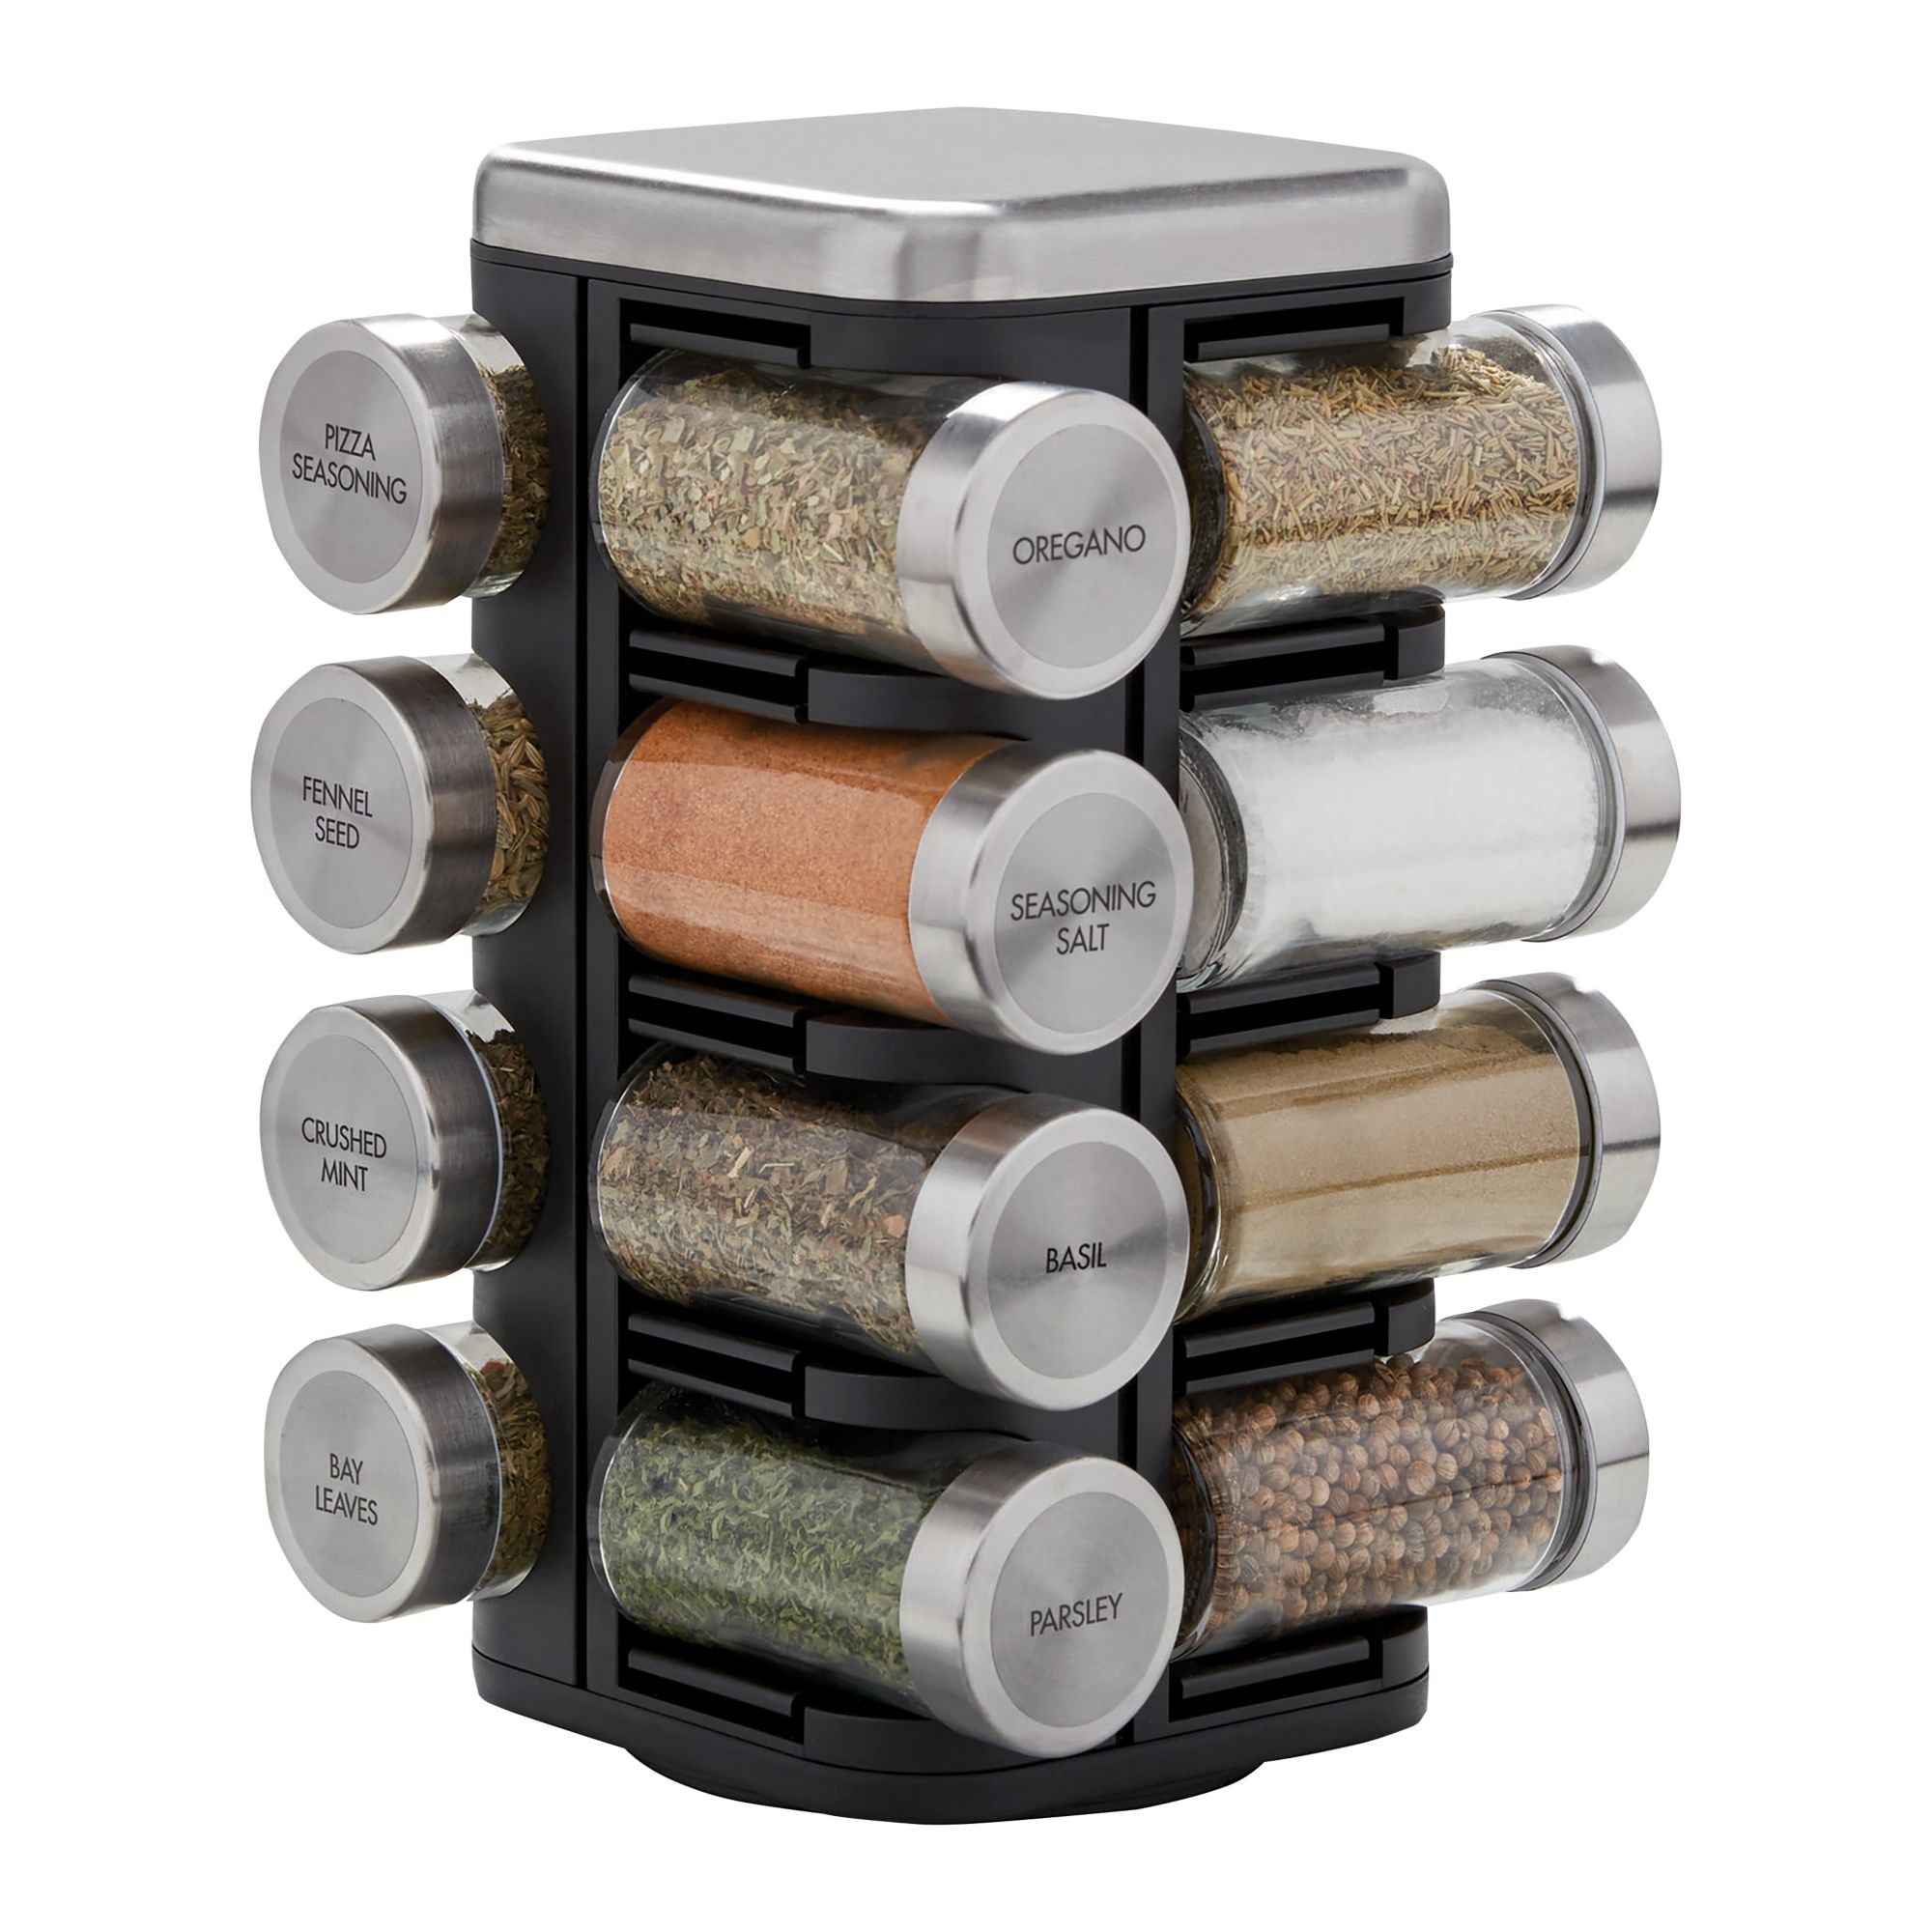 20-Jar Revolving Spice Tower with Free Spice Refills for 5 Years